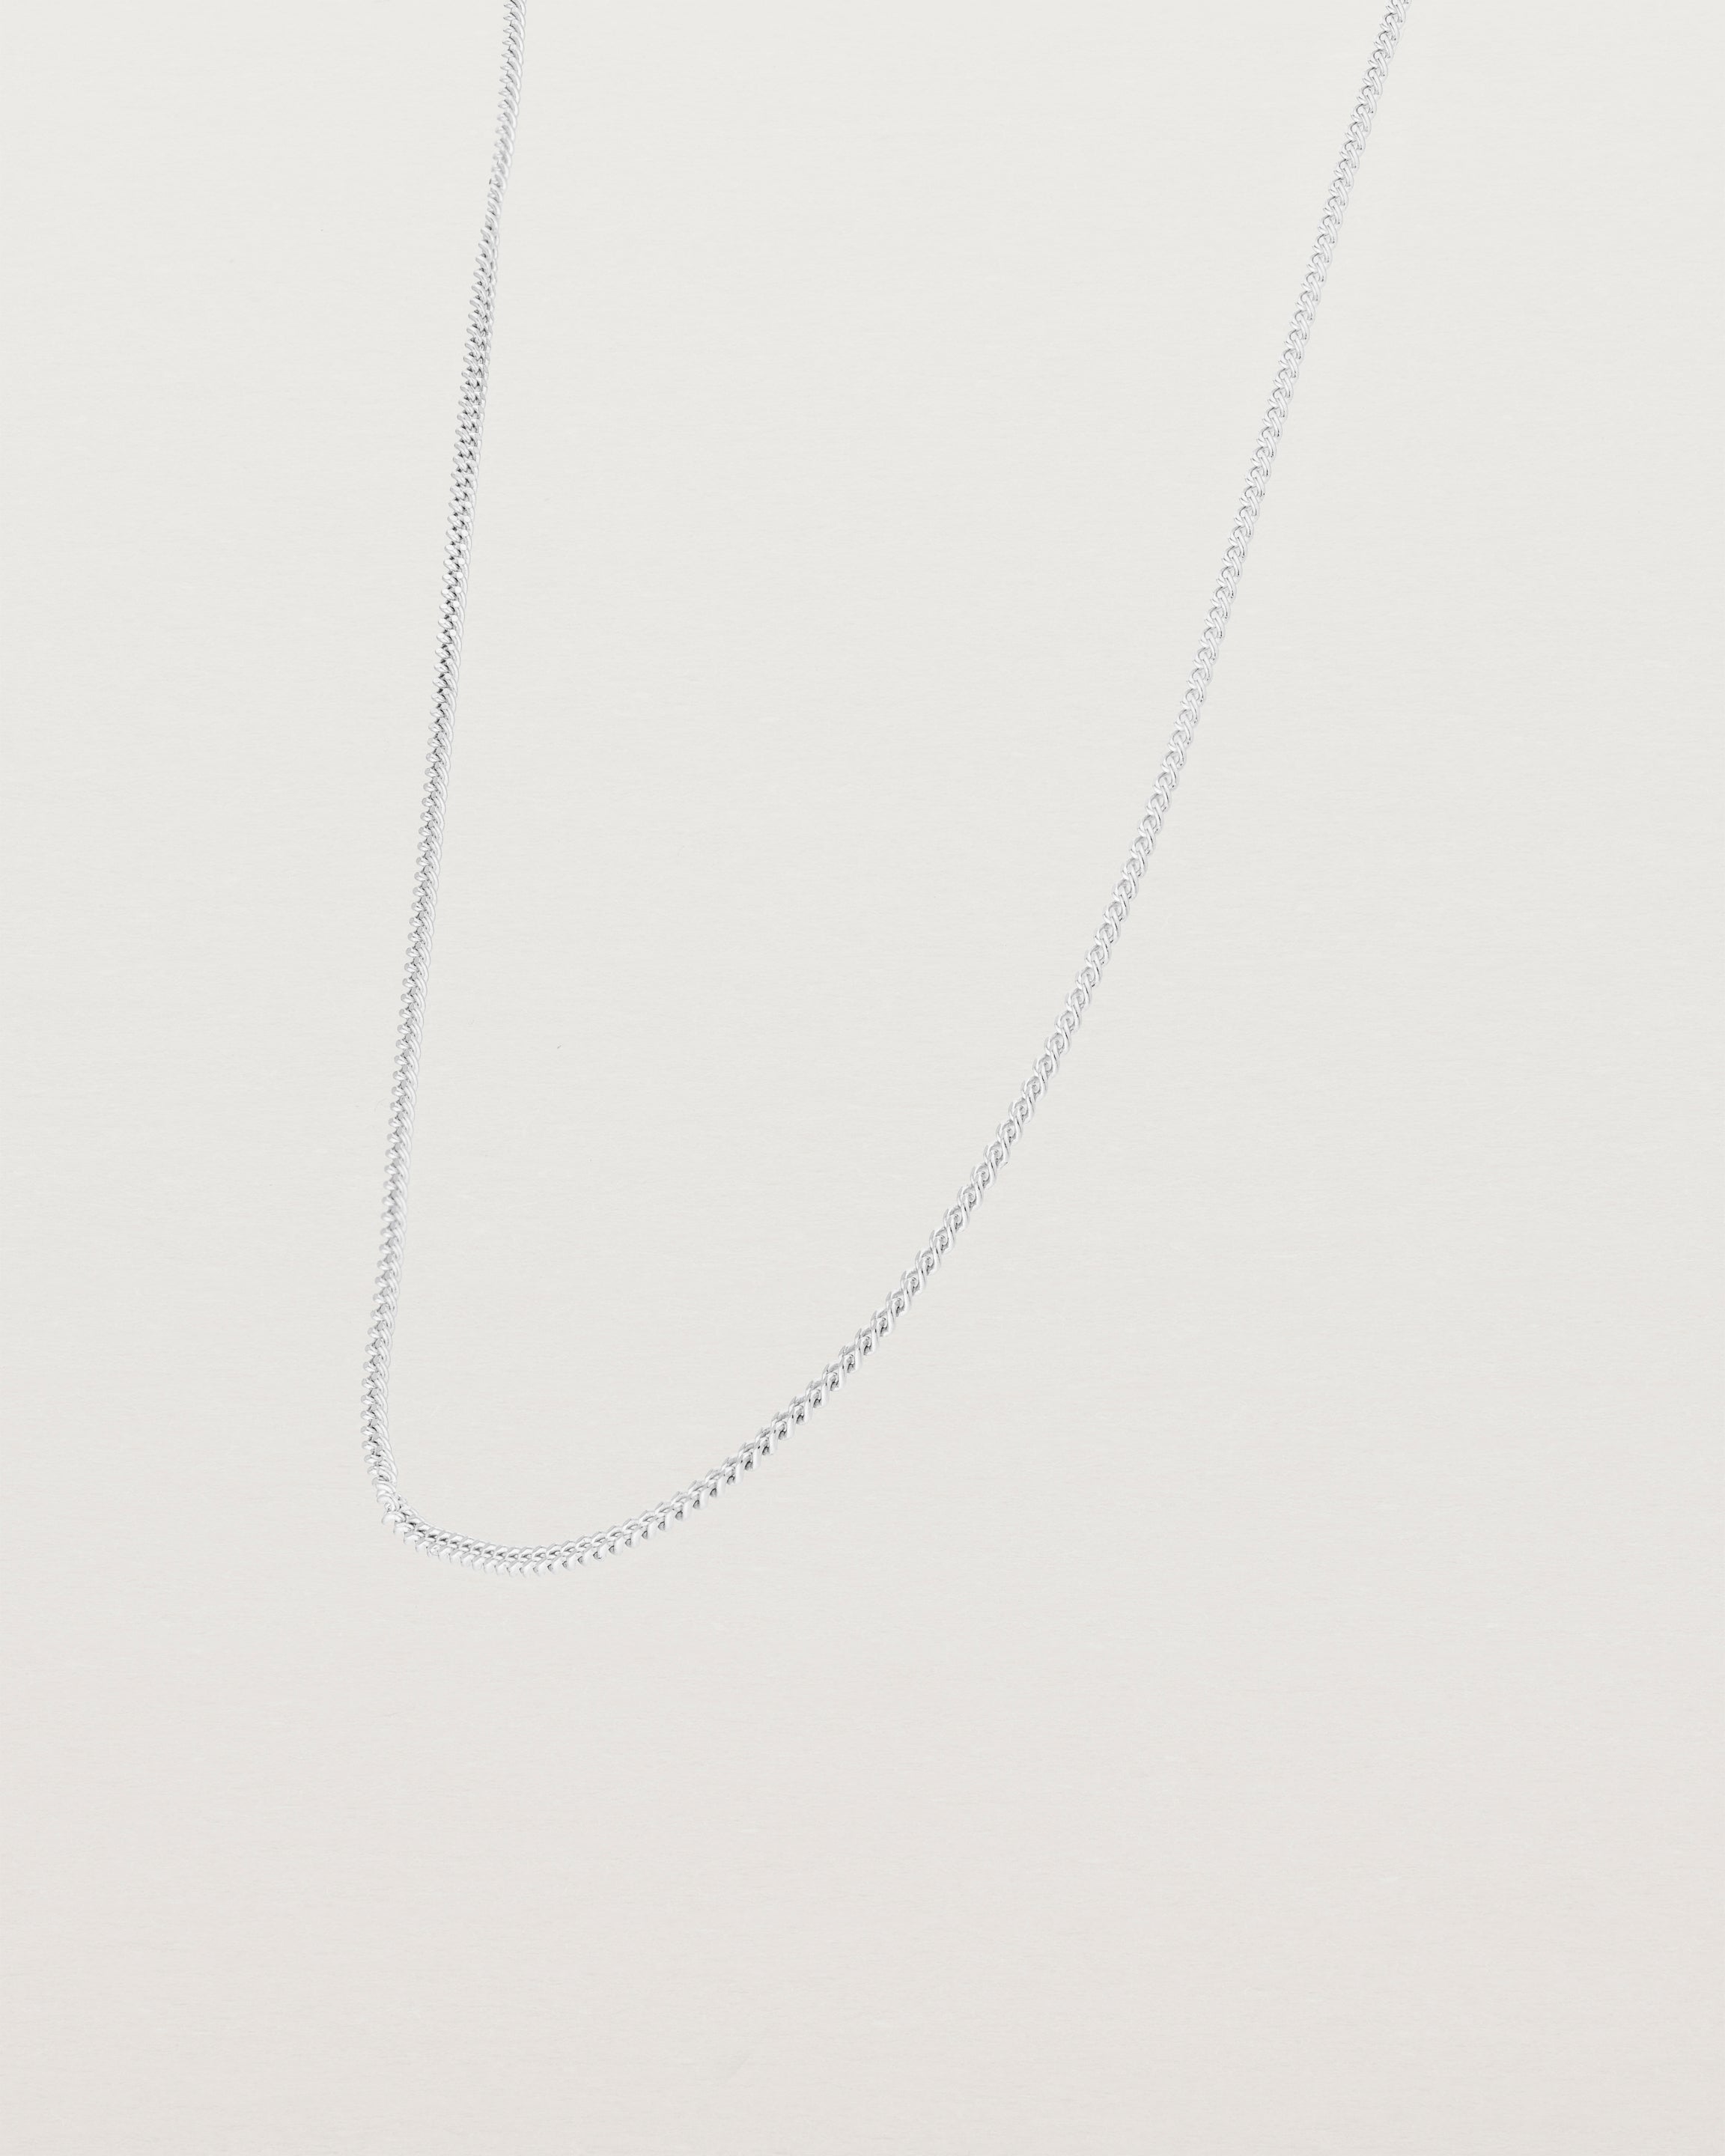 Angled view of the Simple Chain Necklace | Sterling Silver